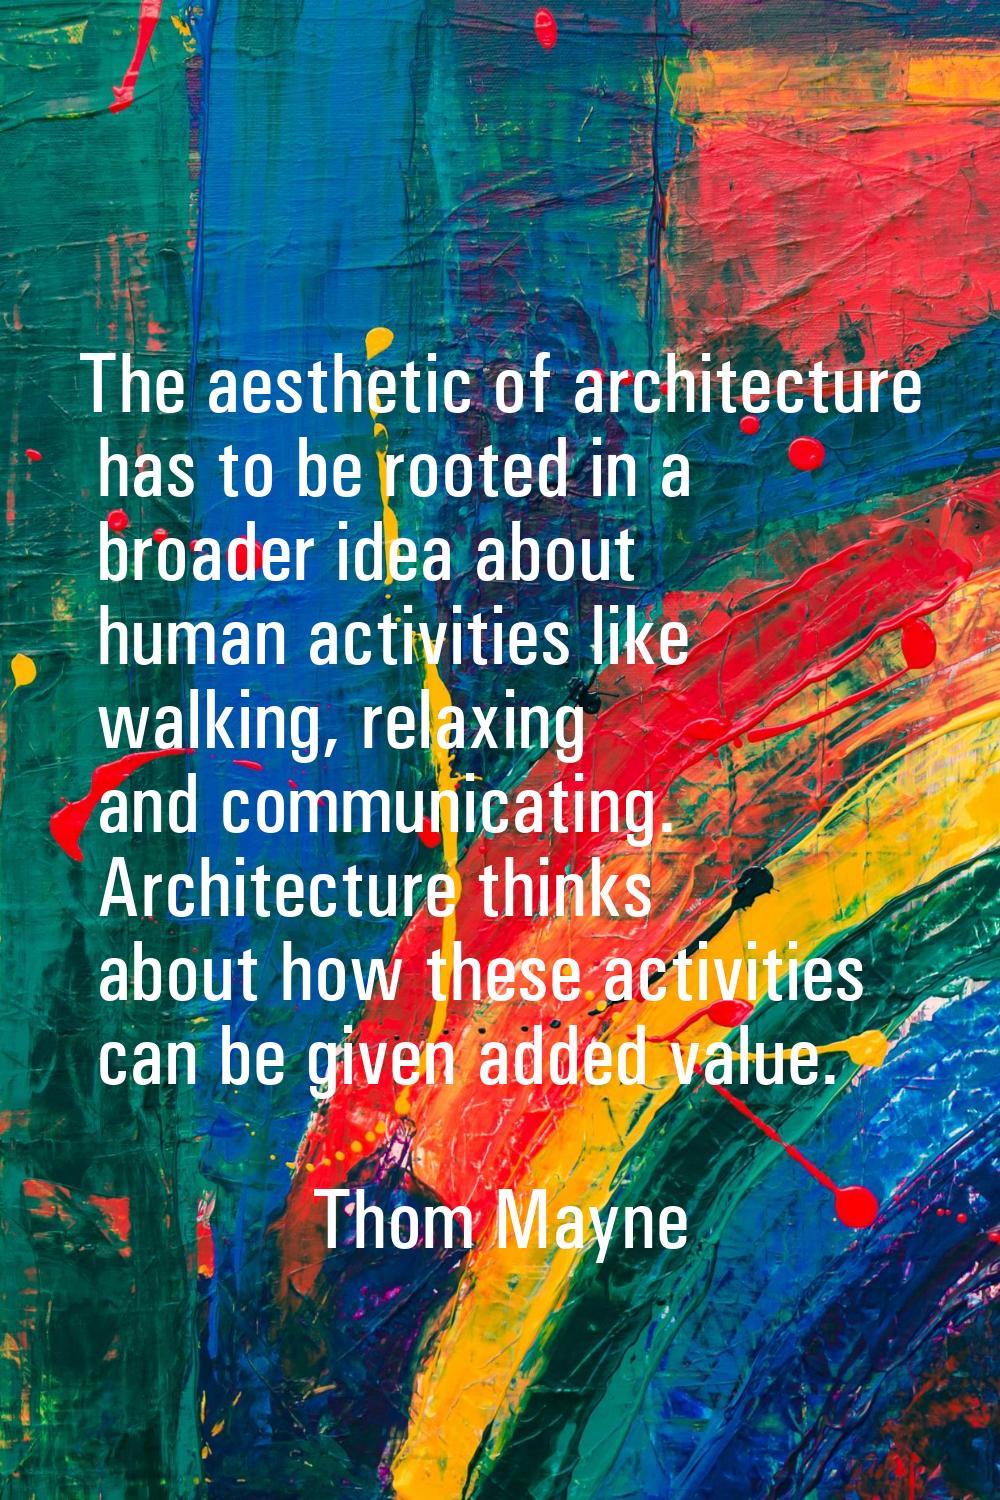 The aesthetic of architecture has to be rooted in a broader idea about human activities like walkin